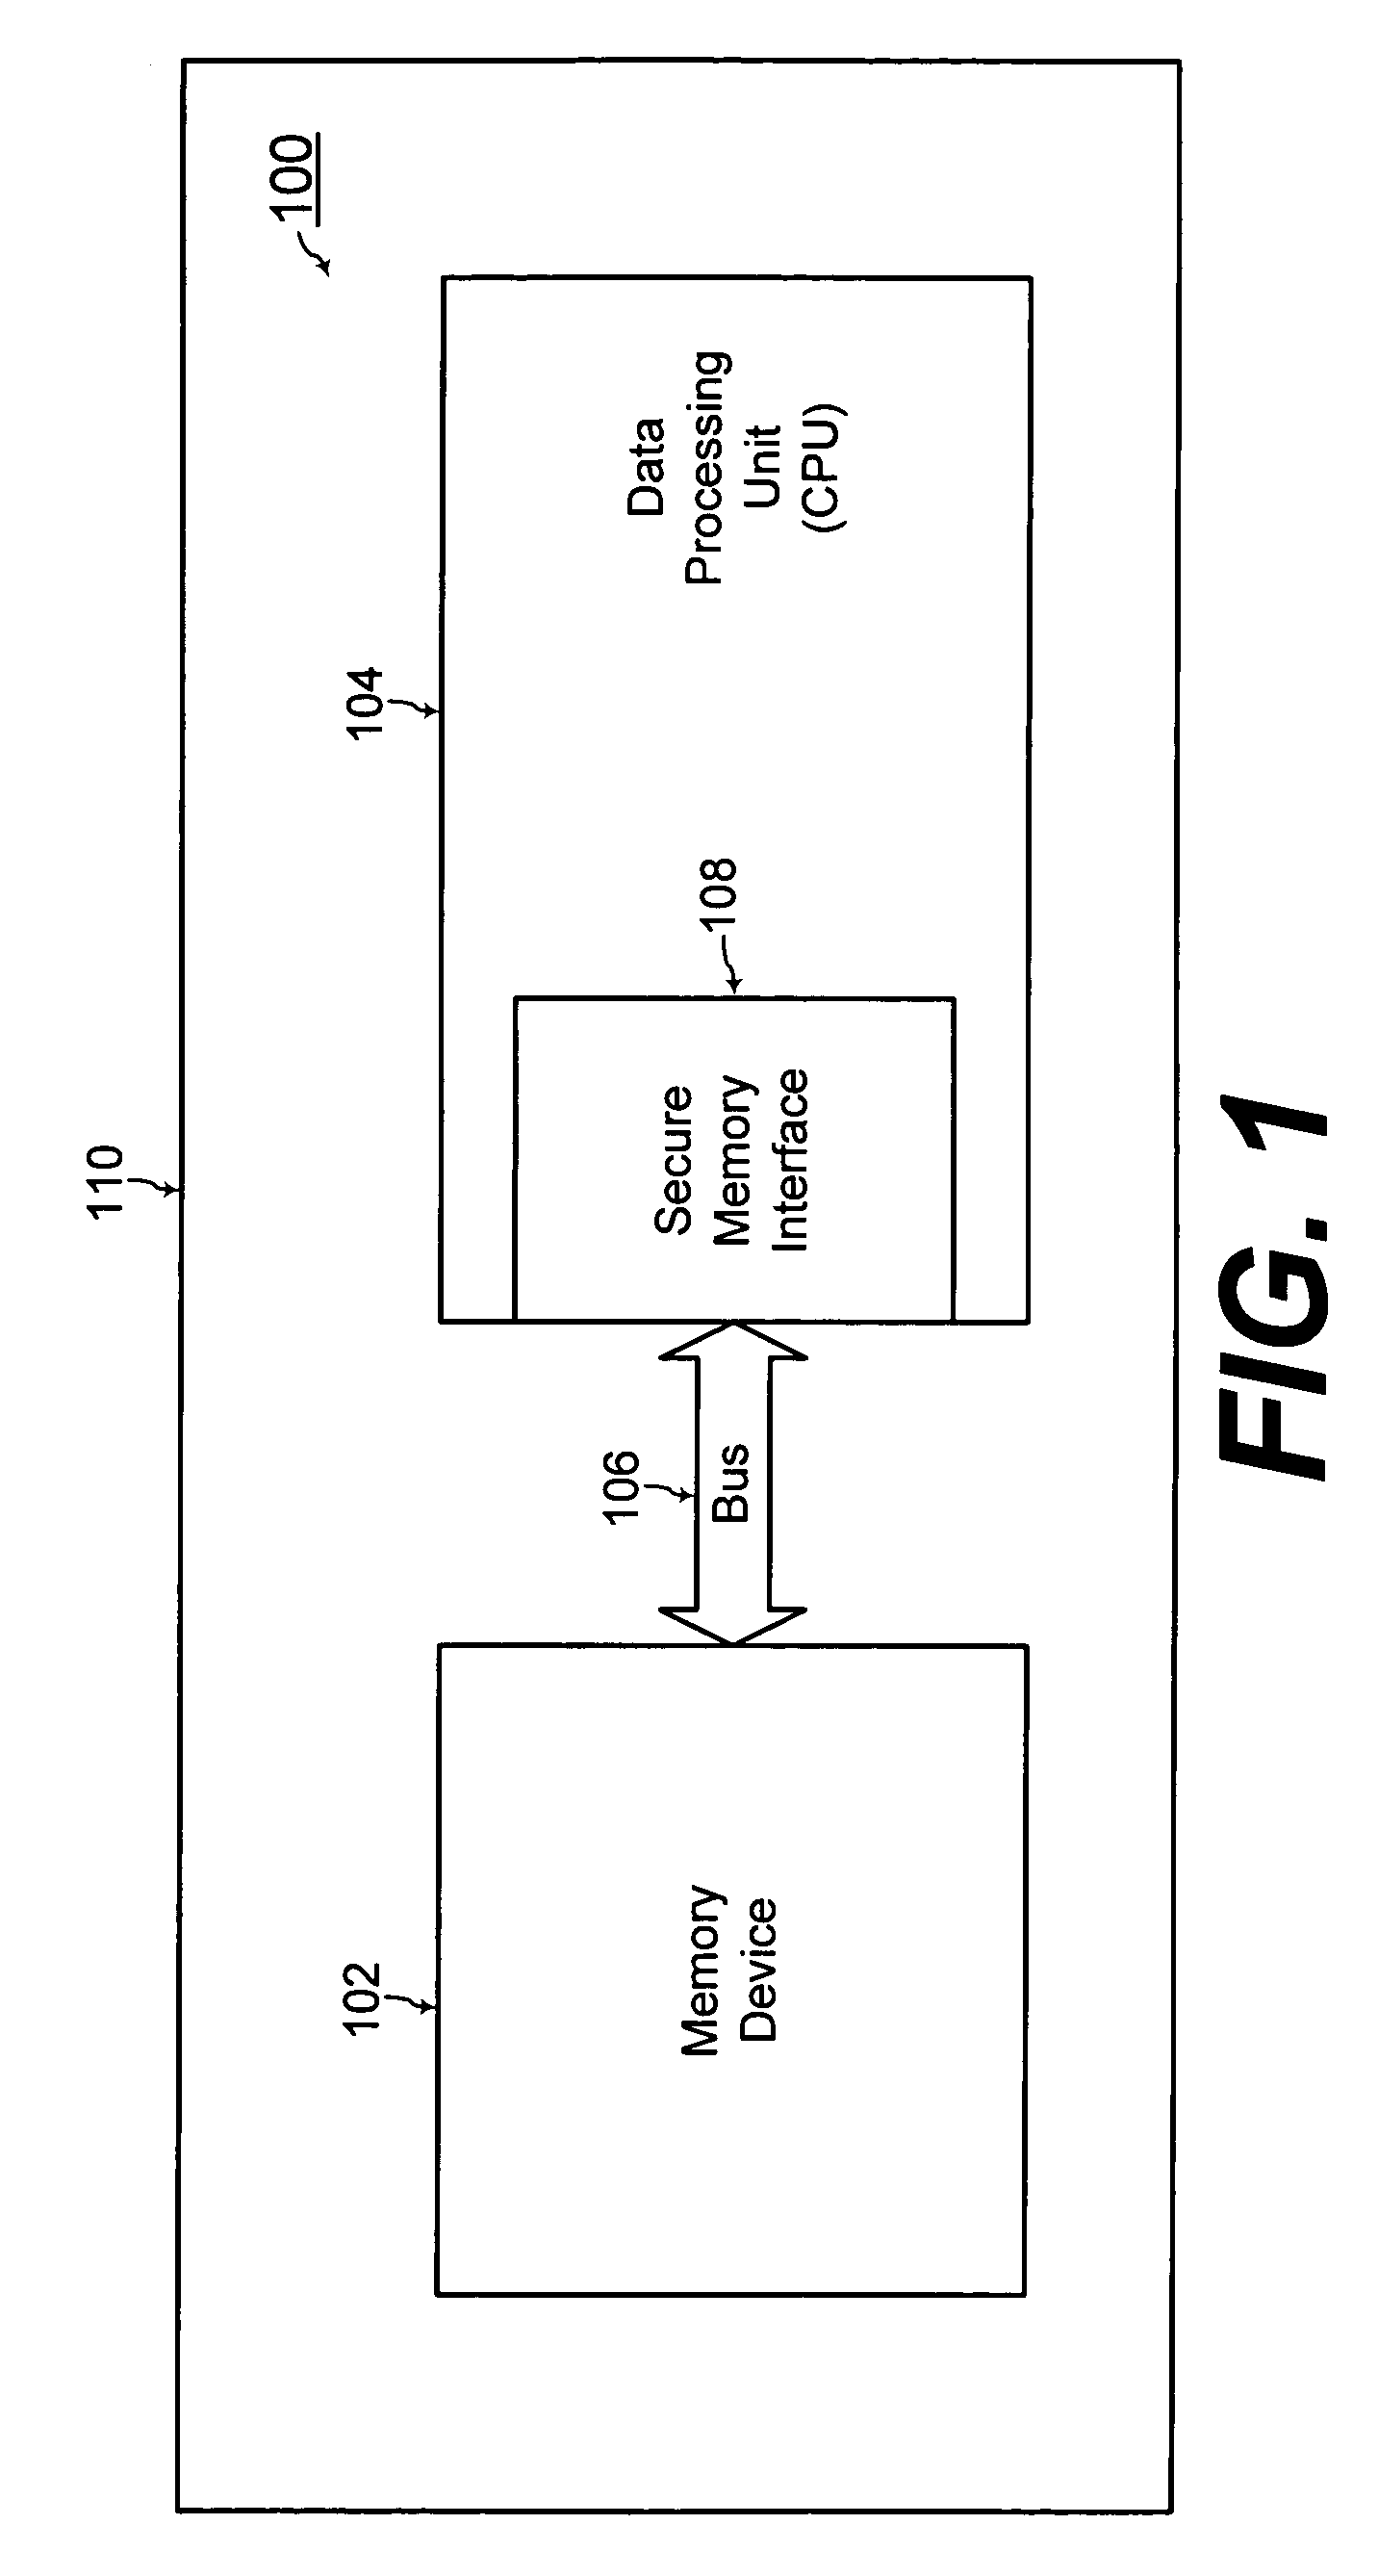 Secure memory interface